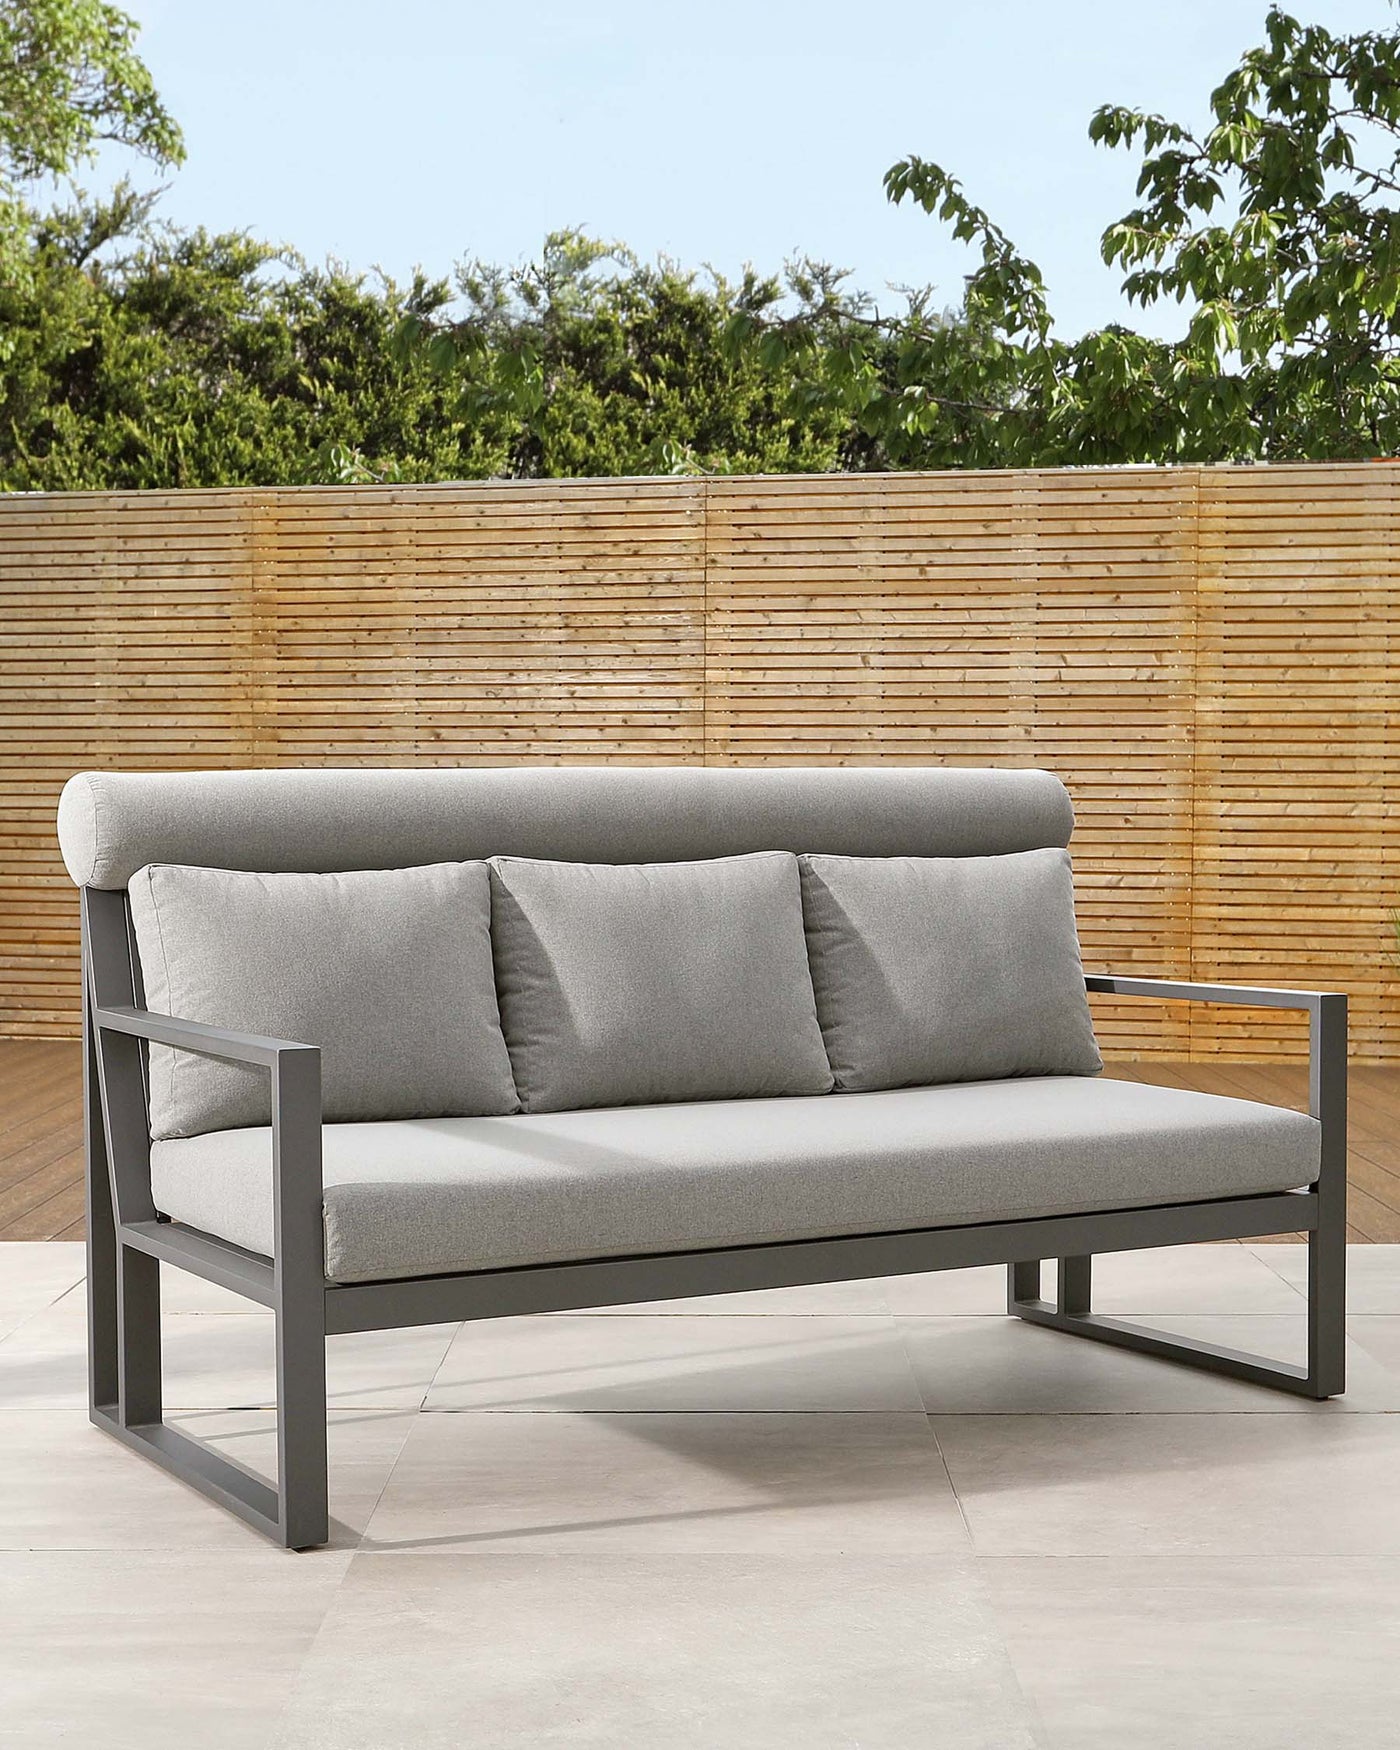 Modern outdoor sofa with a sleek grey metal frame and light grey cushions, featuring clean lines and minimalist design, set against a natural bamboo backdrop.